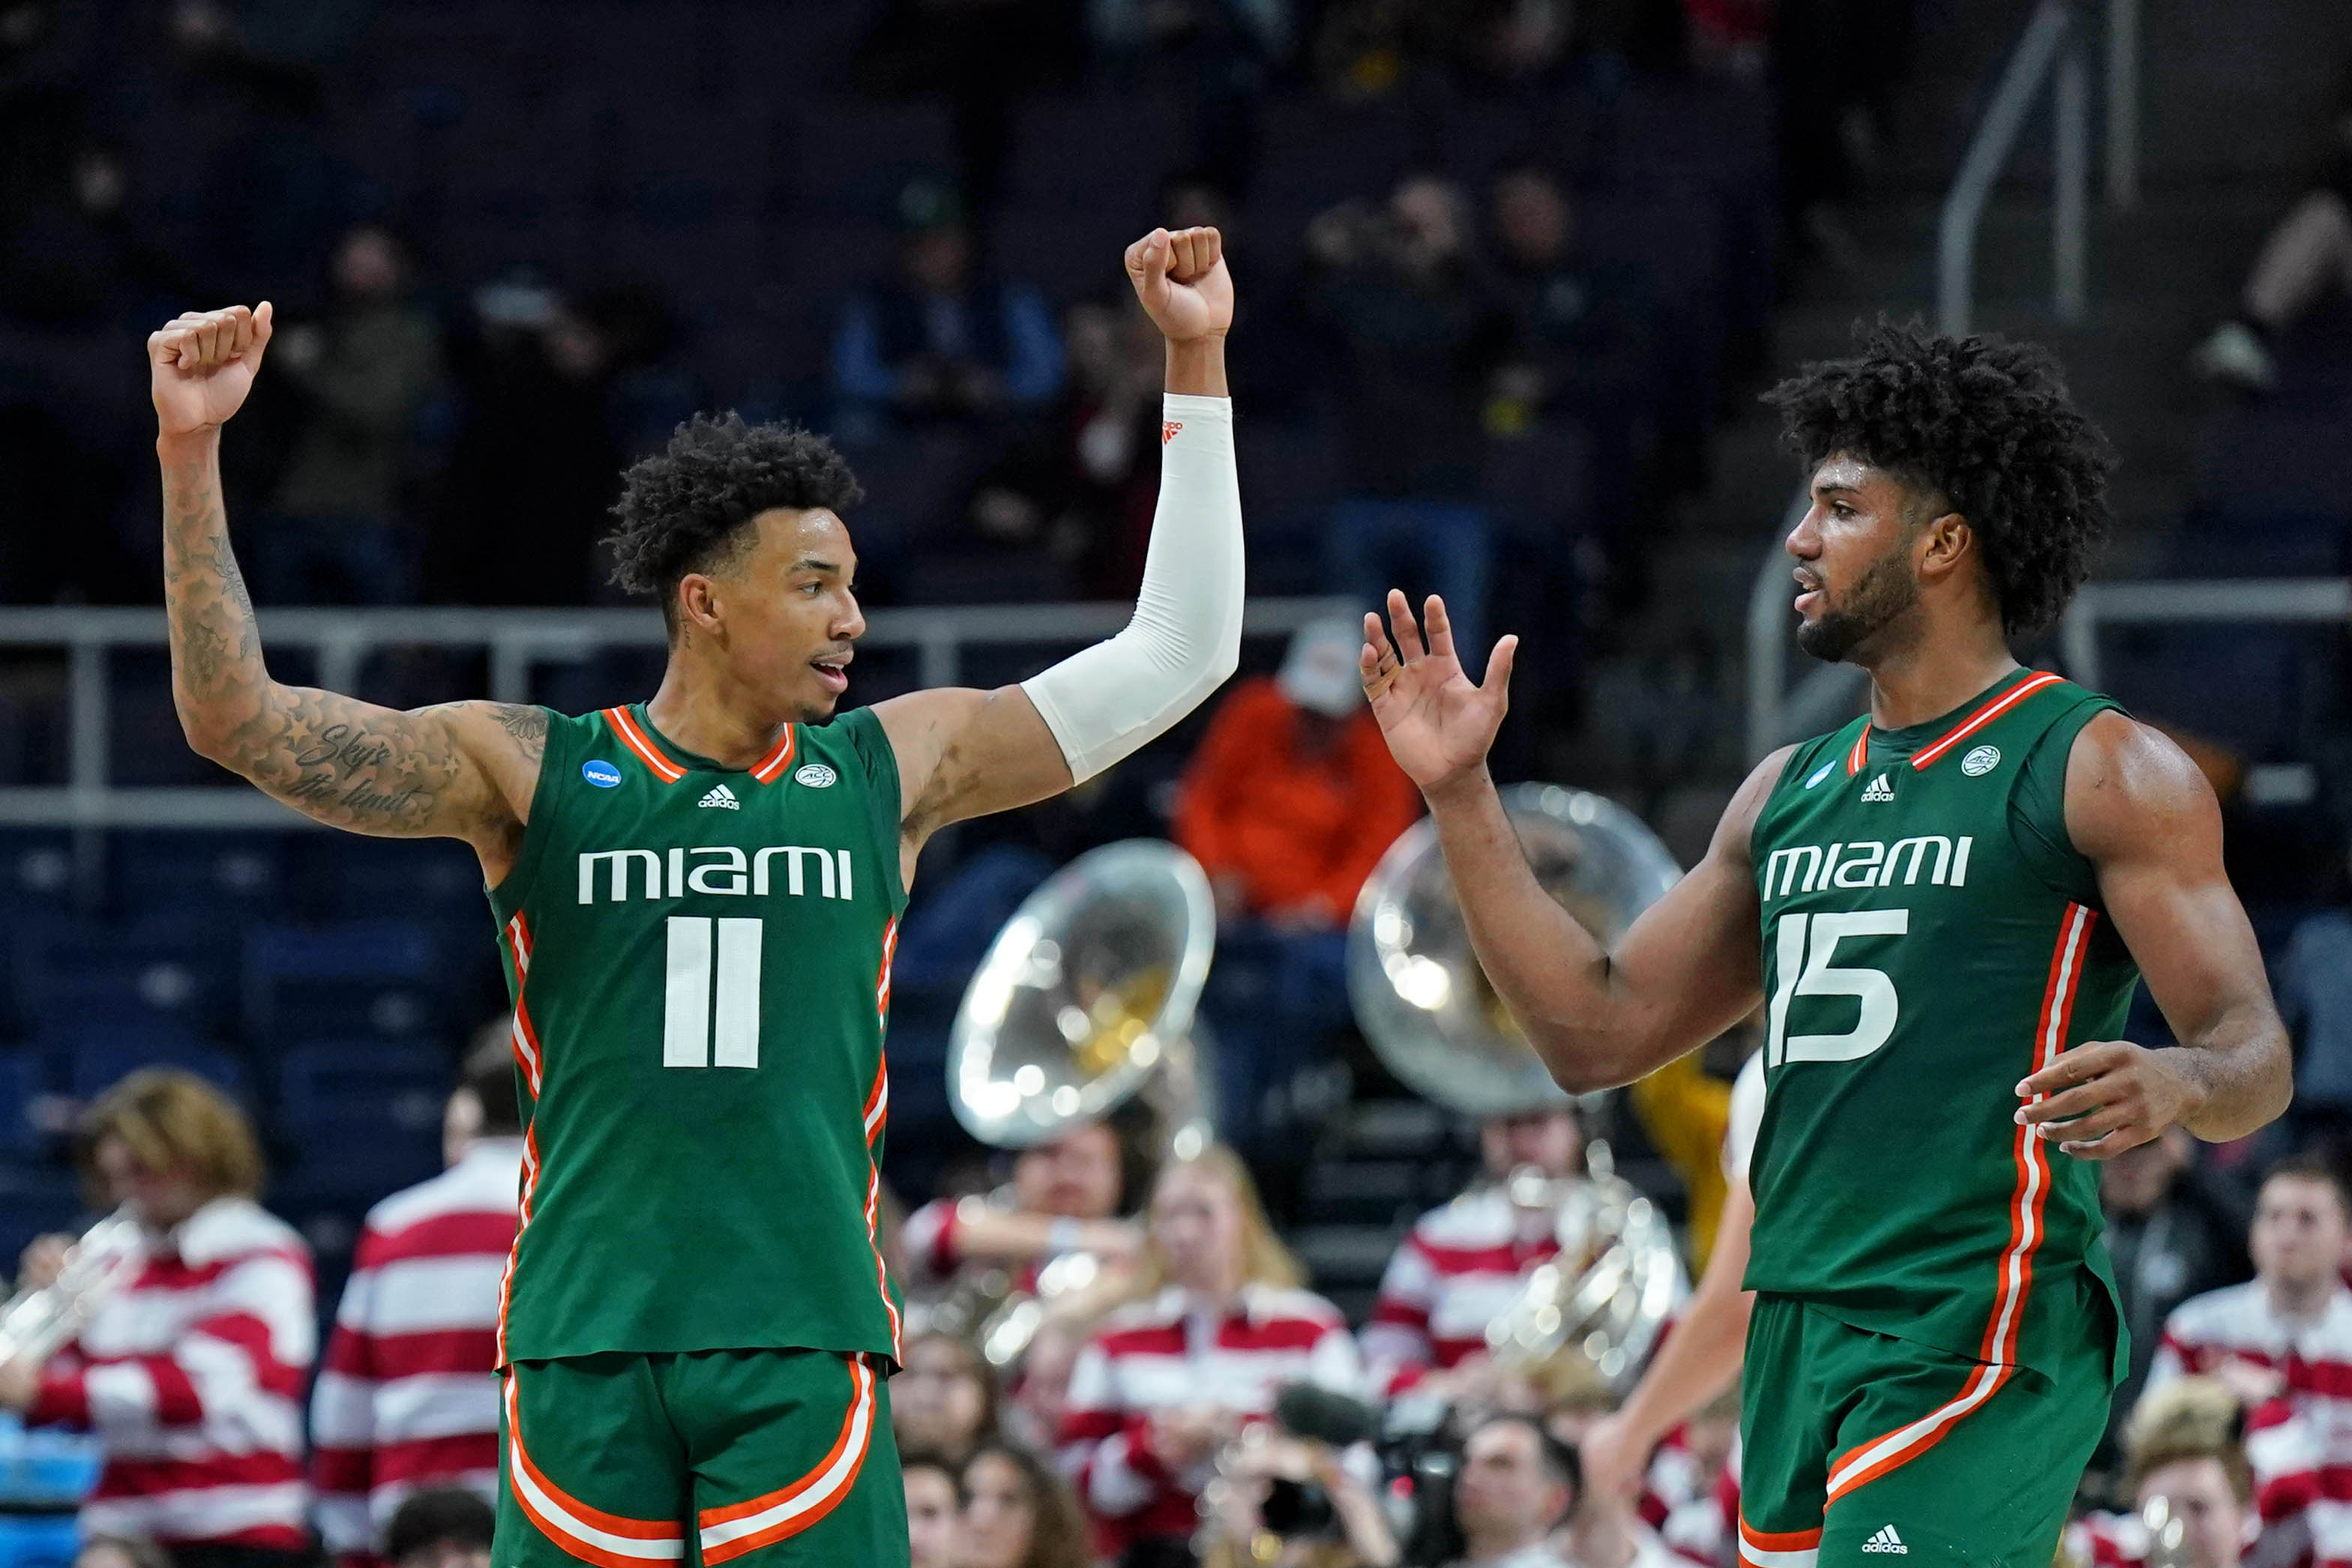 Miami's win over Indiana extends ACC's decades-long Sweet 16 streak